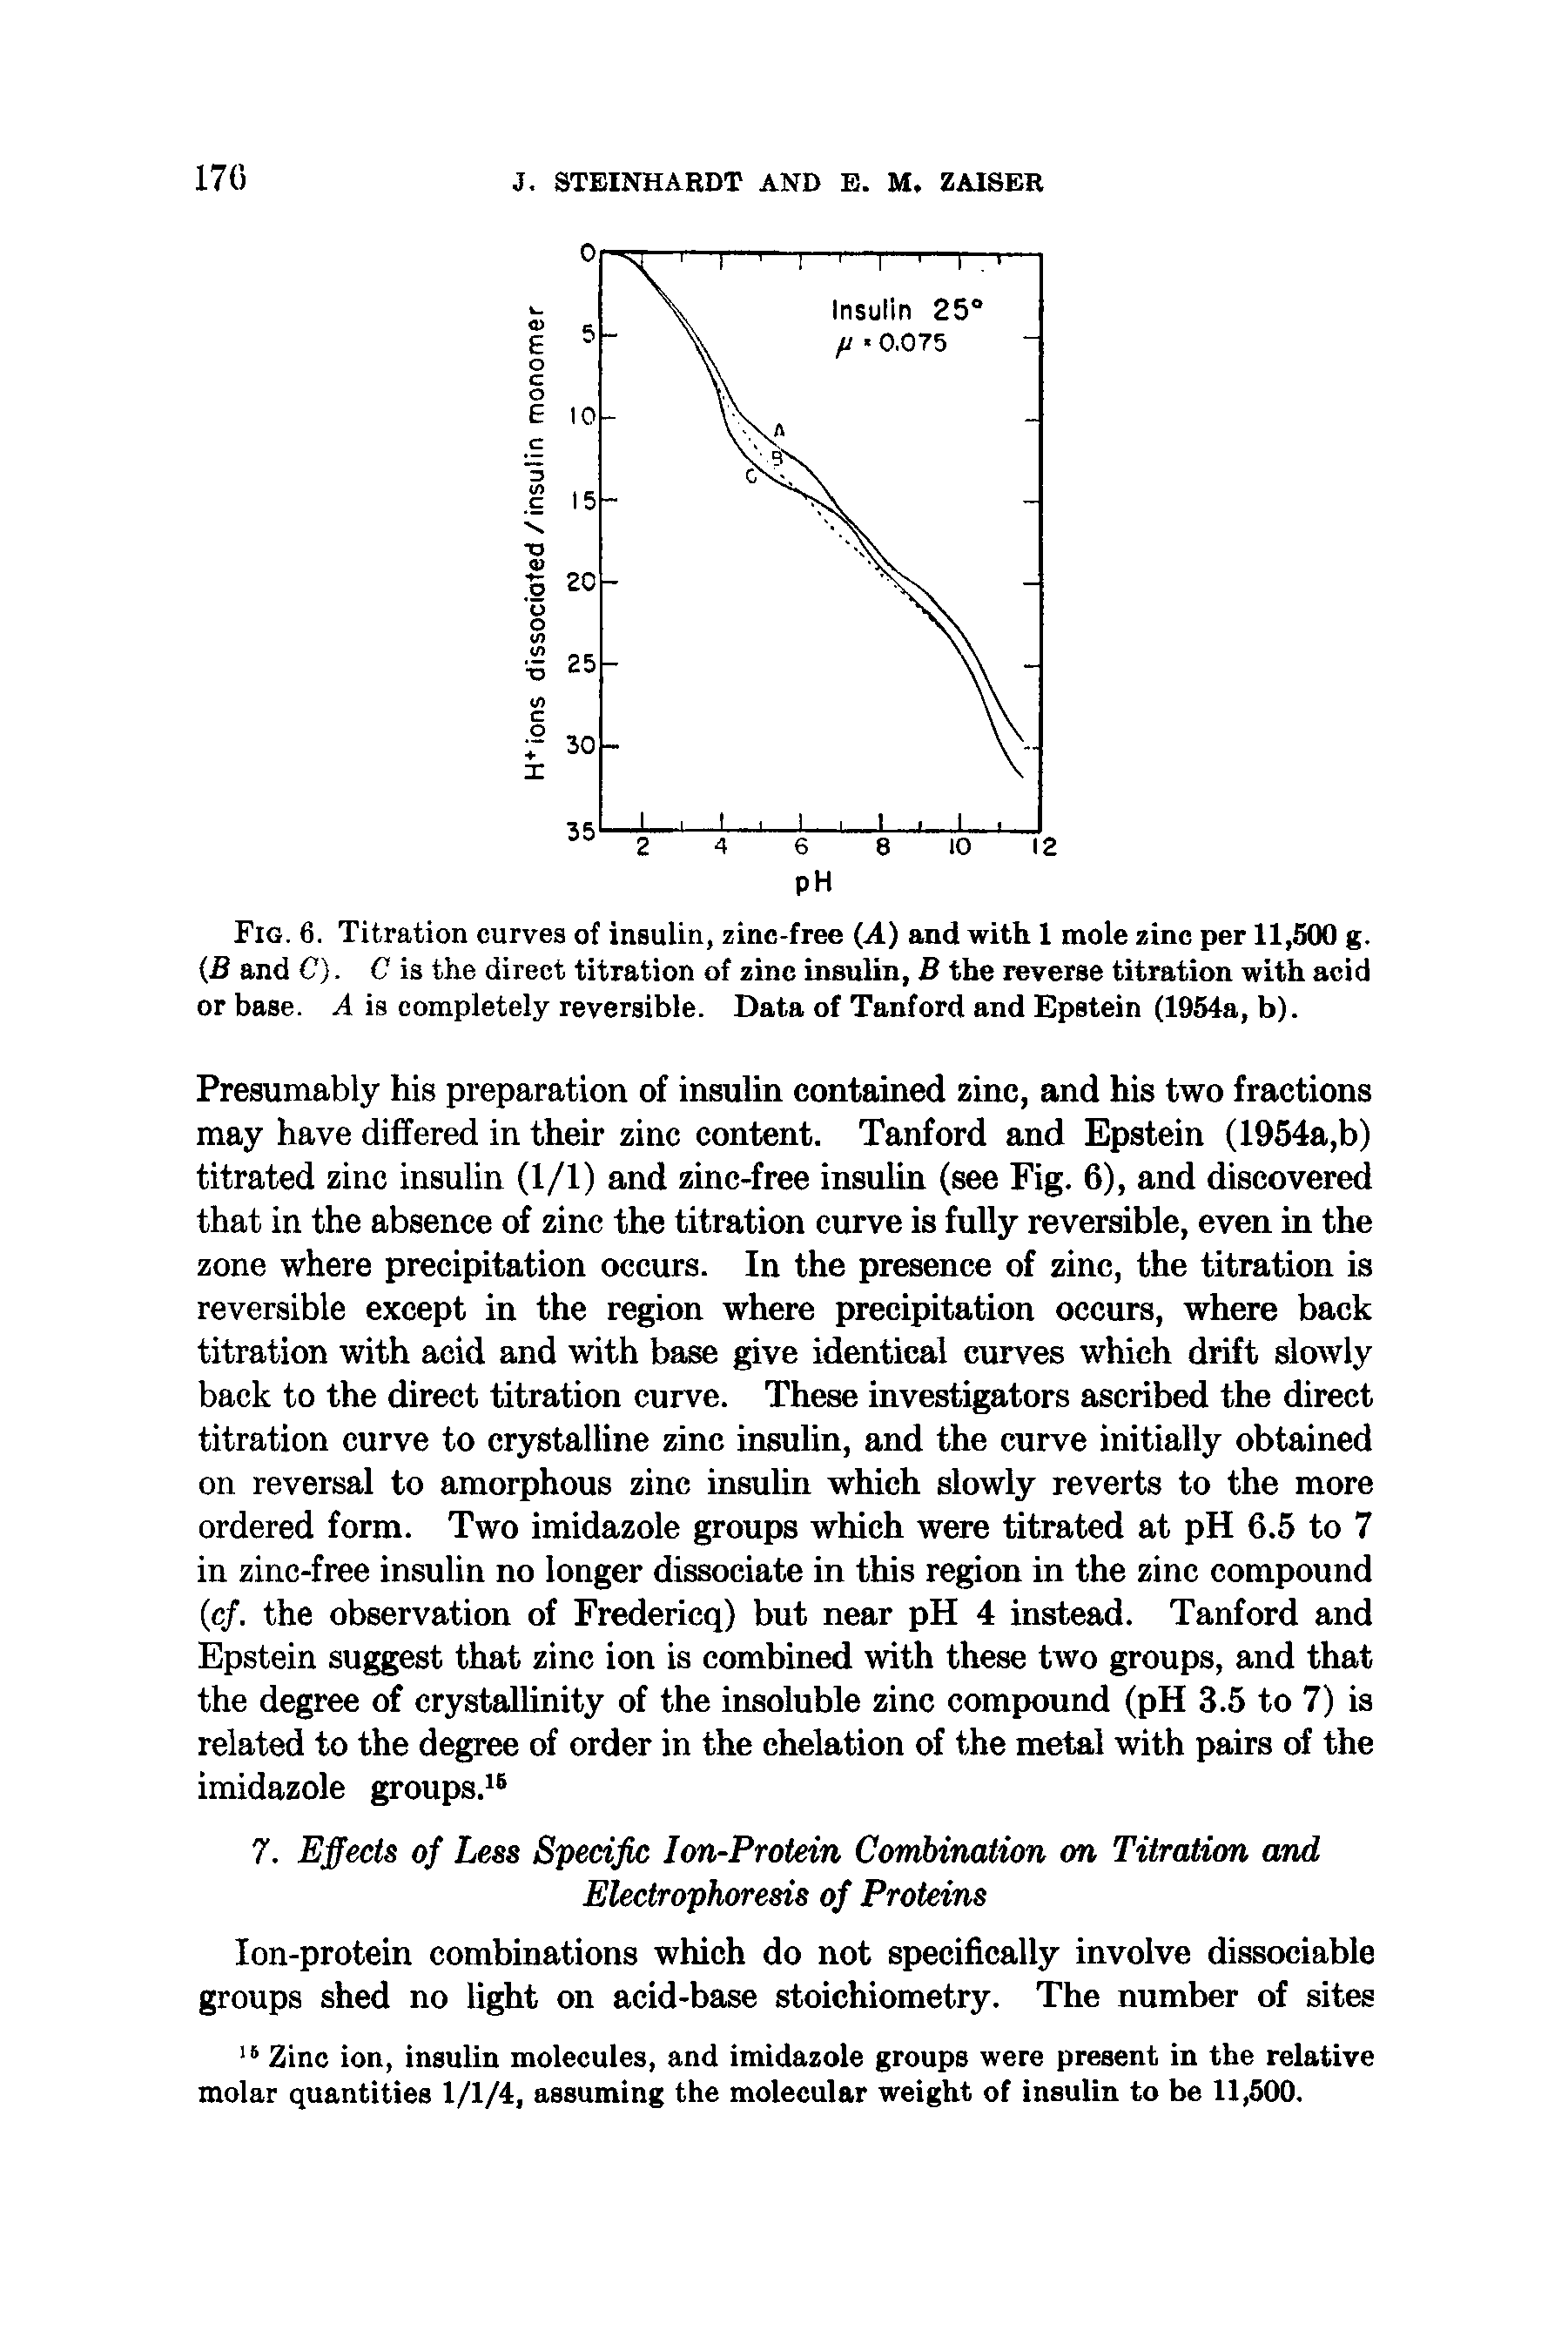 Fig. 6. Titration curves of insulin, zinc-free (A) and with. 1 mole zinc per 11,500 g. B and C). C is the direct titration of zinc insulin, B the reverse titration with acid or base. A is completely reversible. Data of Tanford and Epstein (1954a, b).